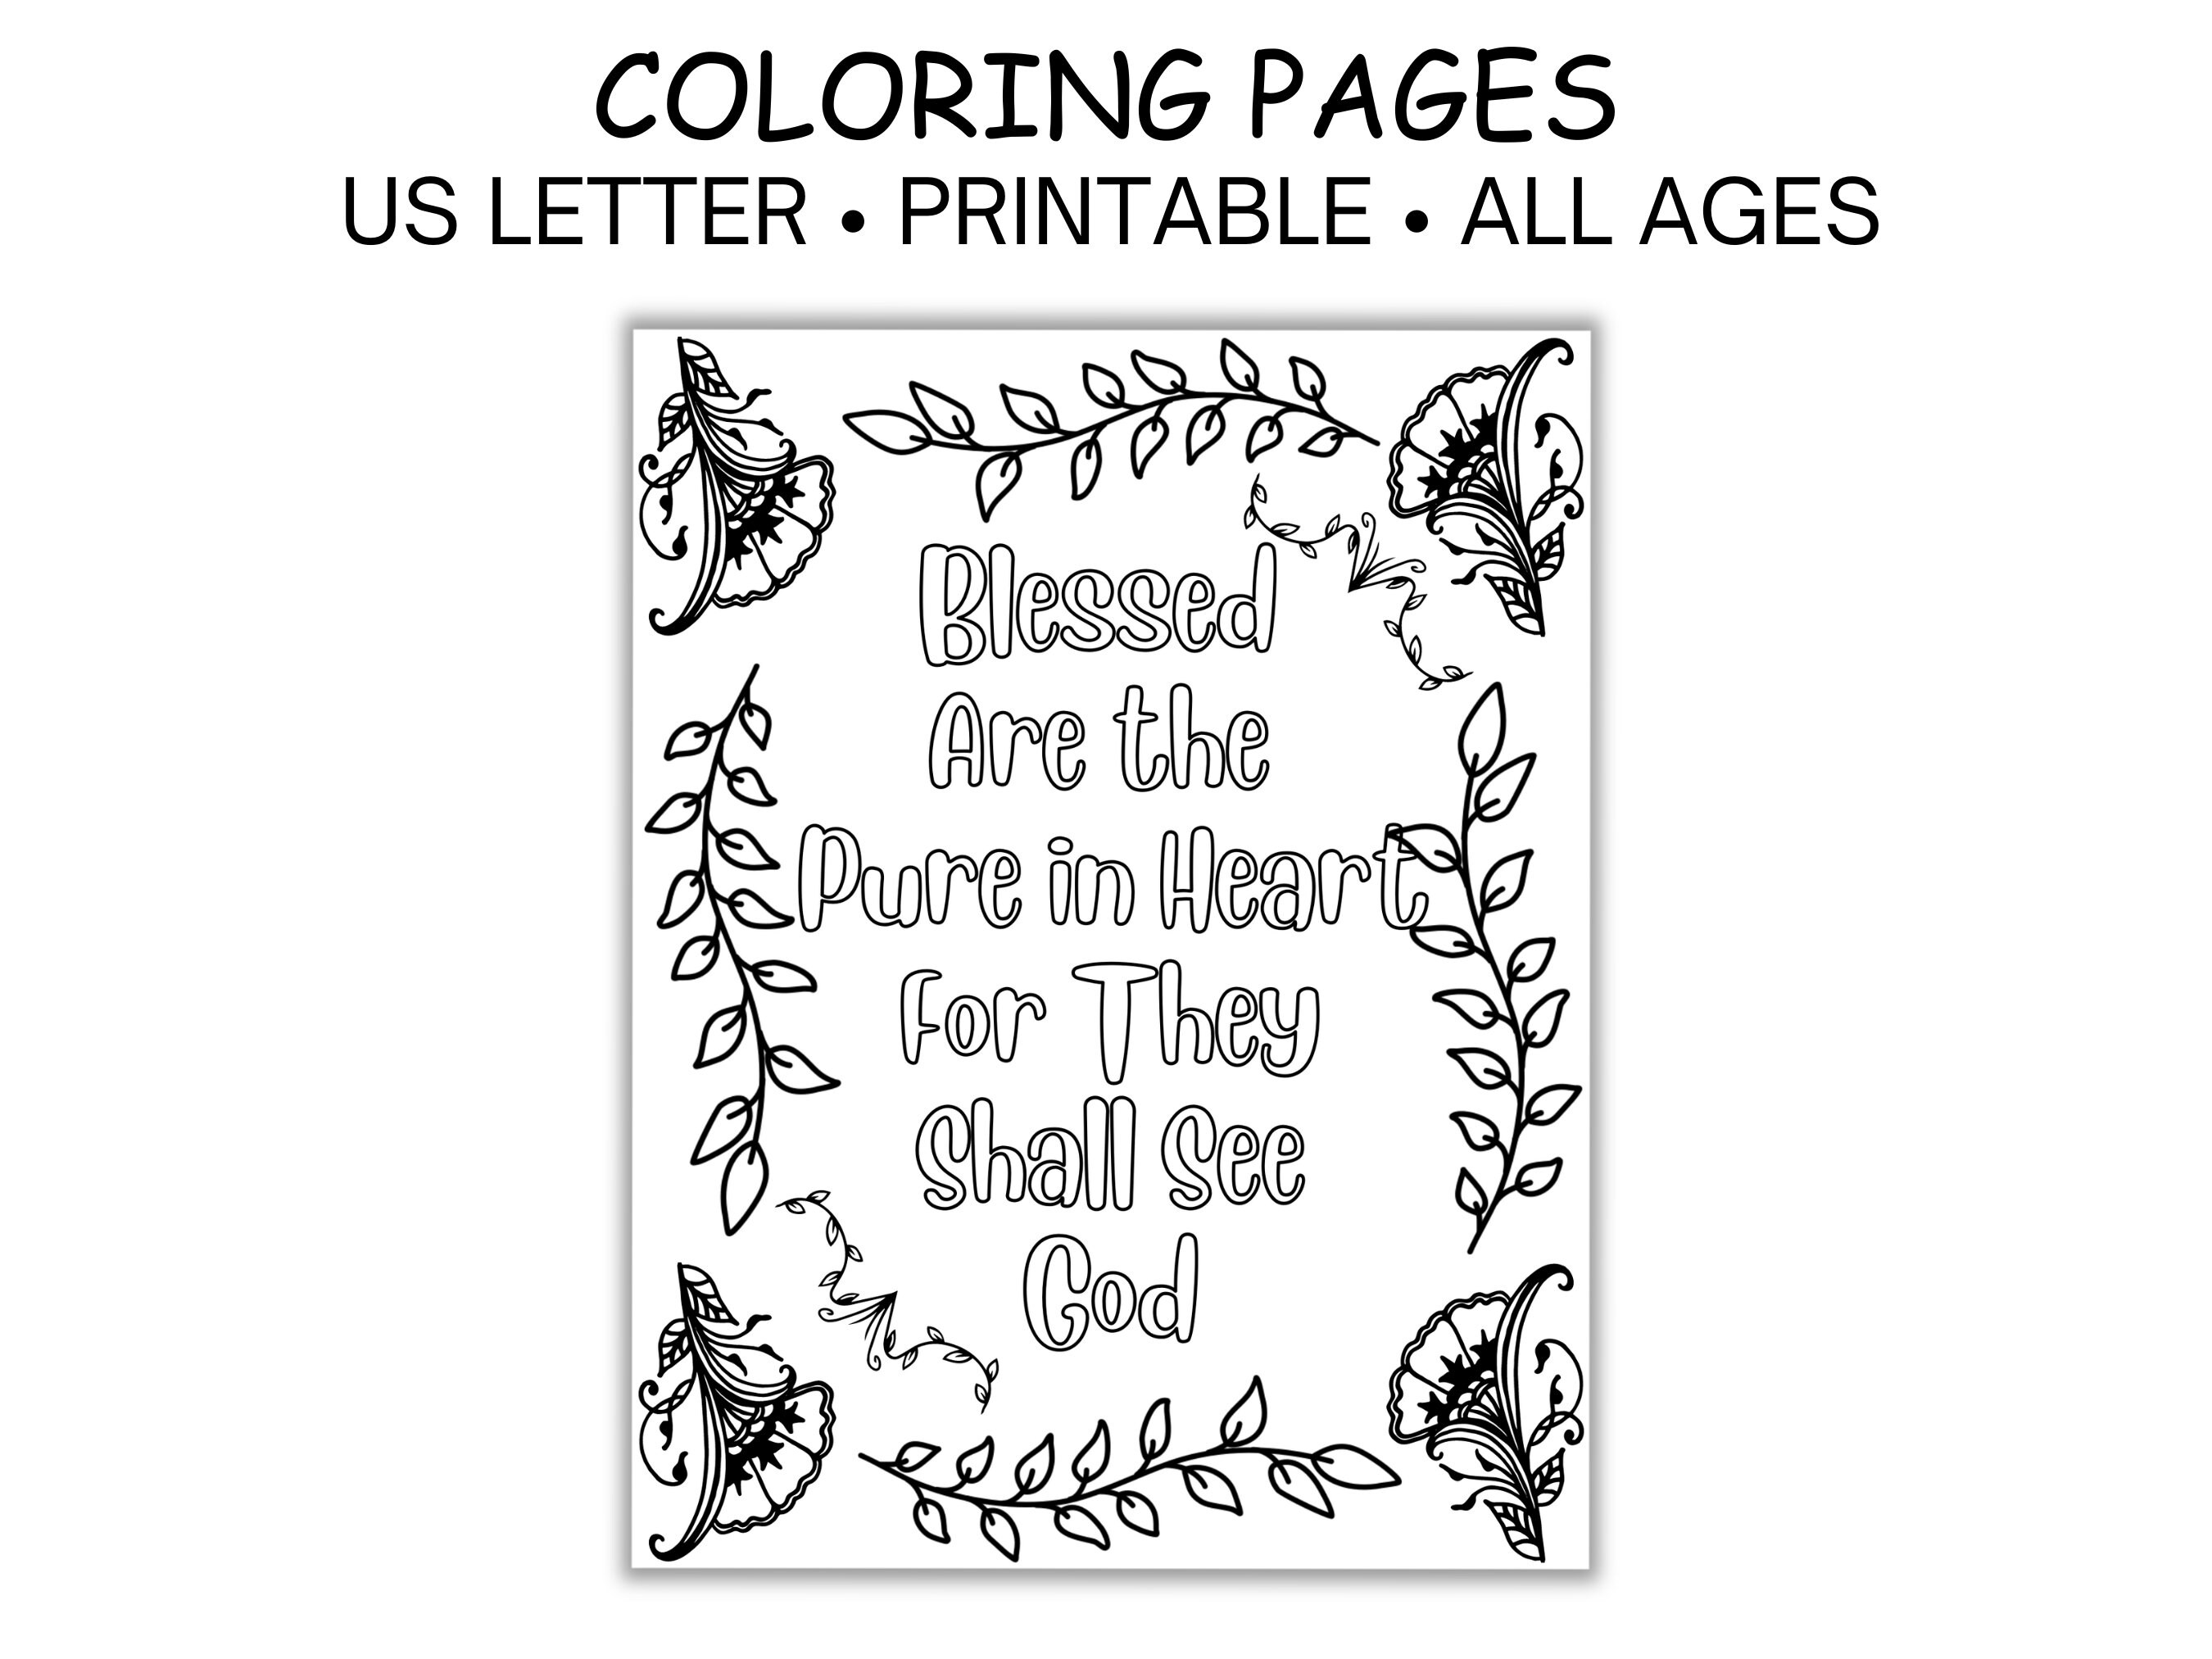 Beatitudes coloring pages all ages kids adults sunday school activities instant download